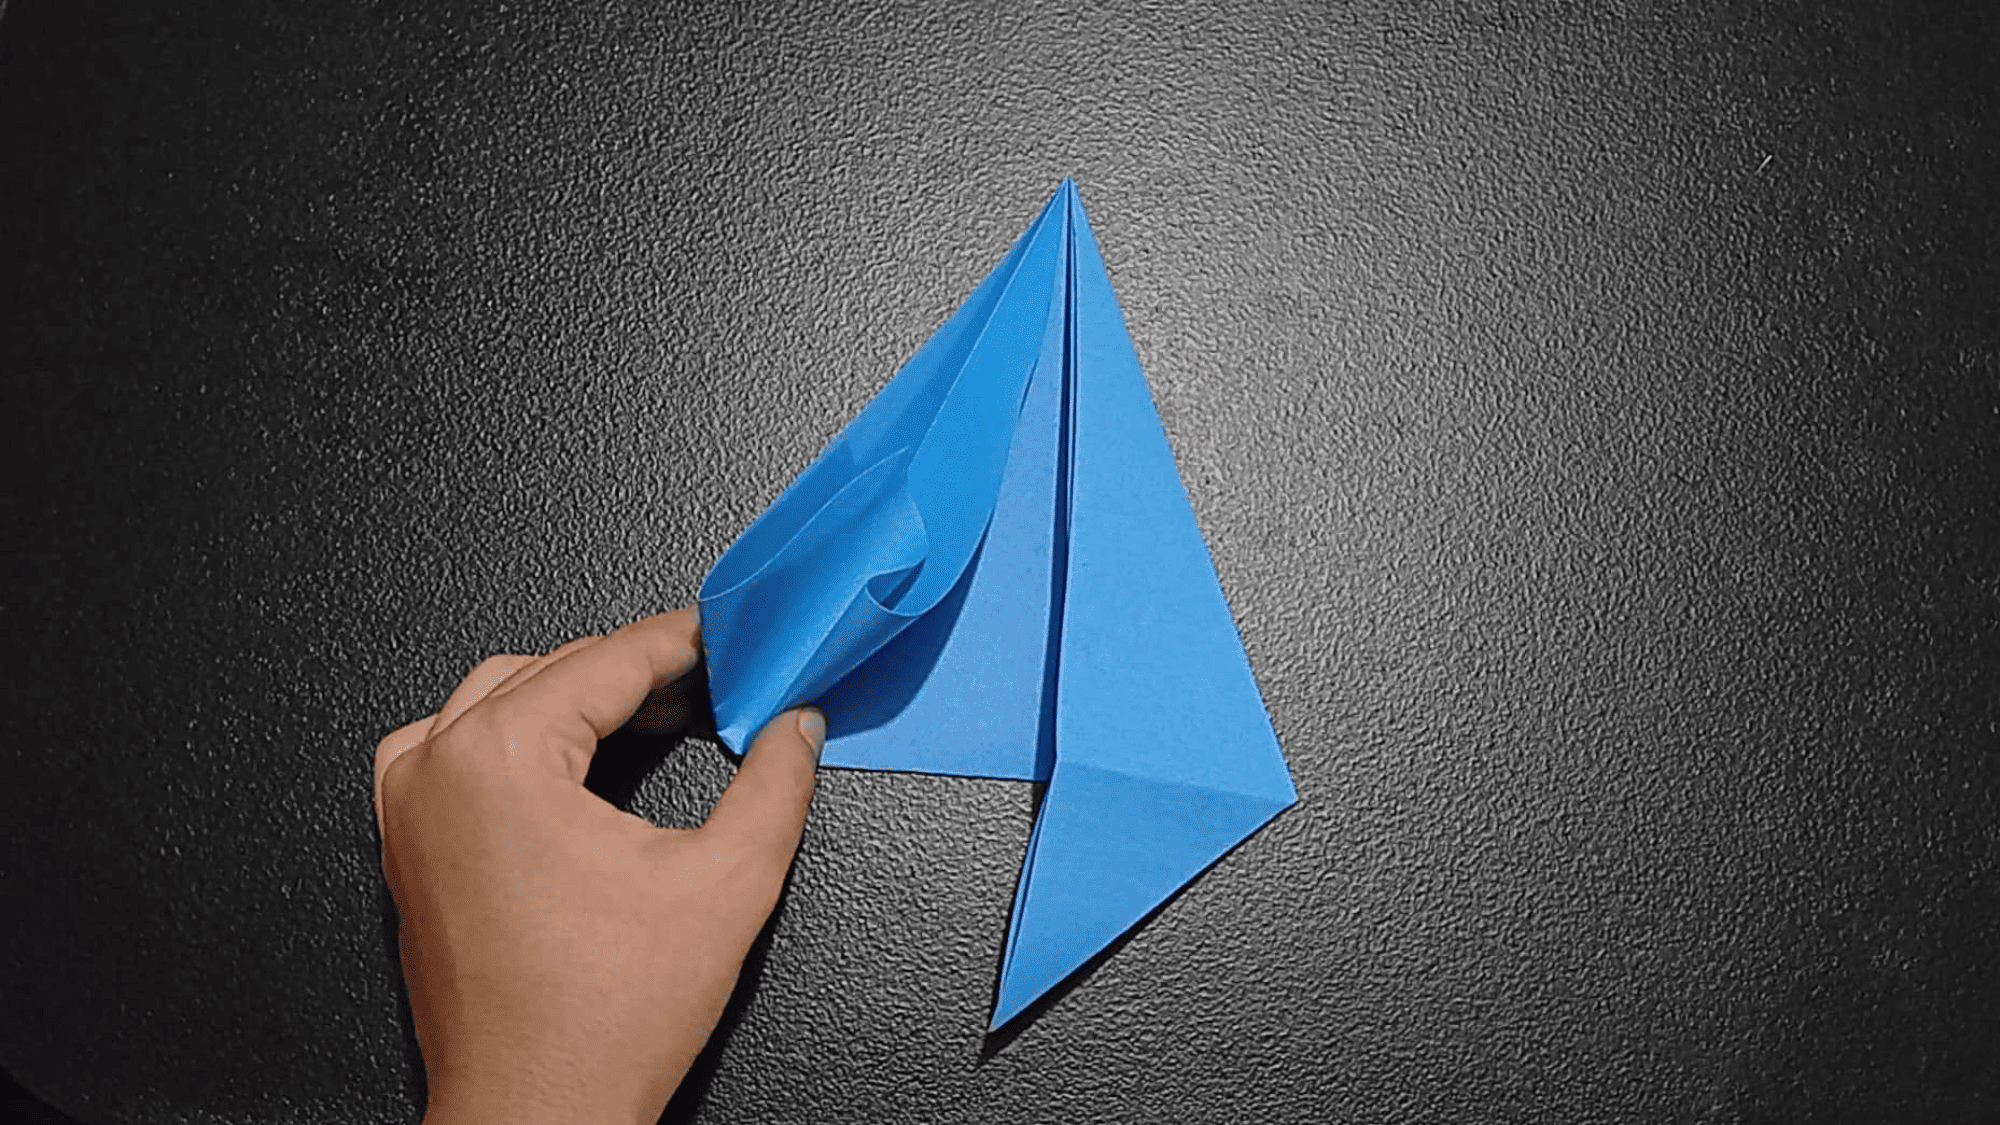 origami angel instructions step 16.1